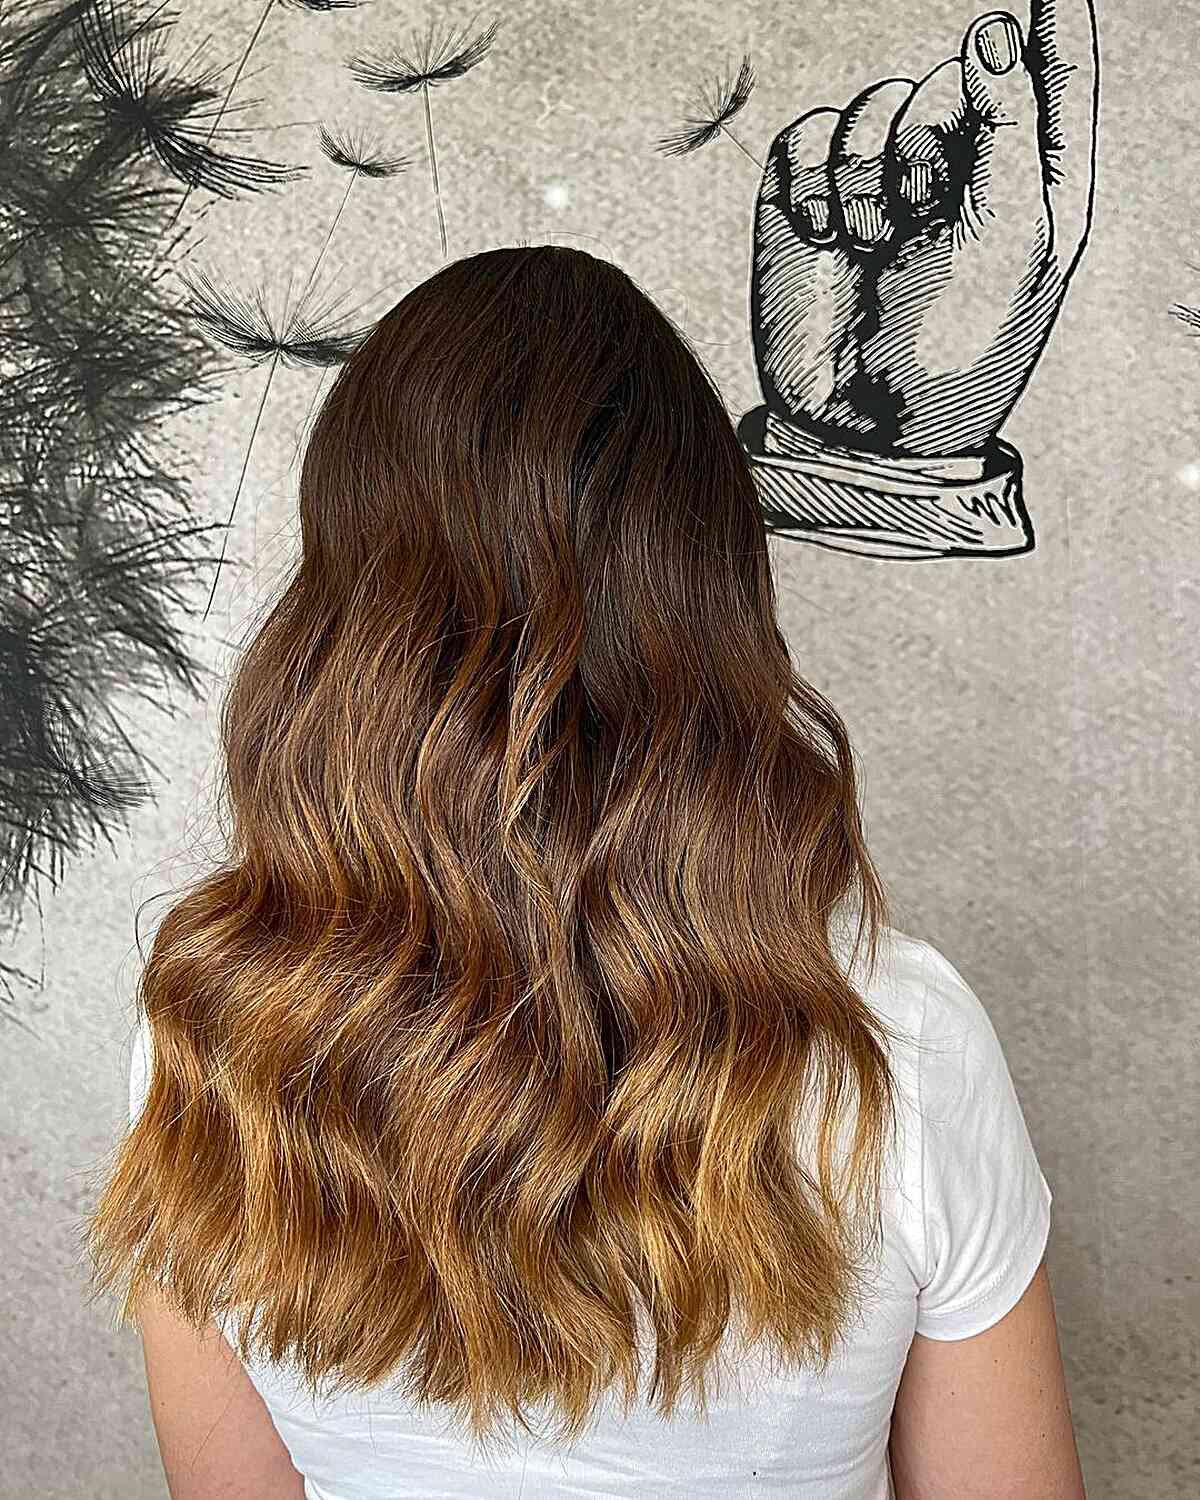 Mid-Long Bronde Ombre with Textured Hair Dusted Ends